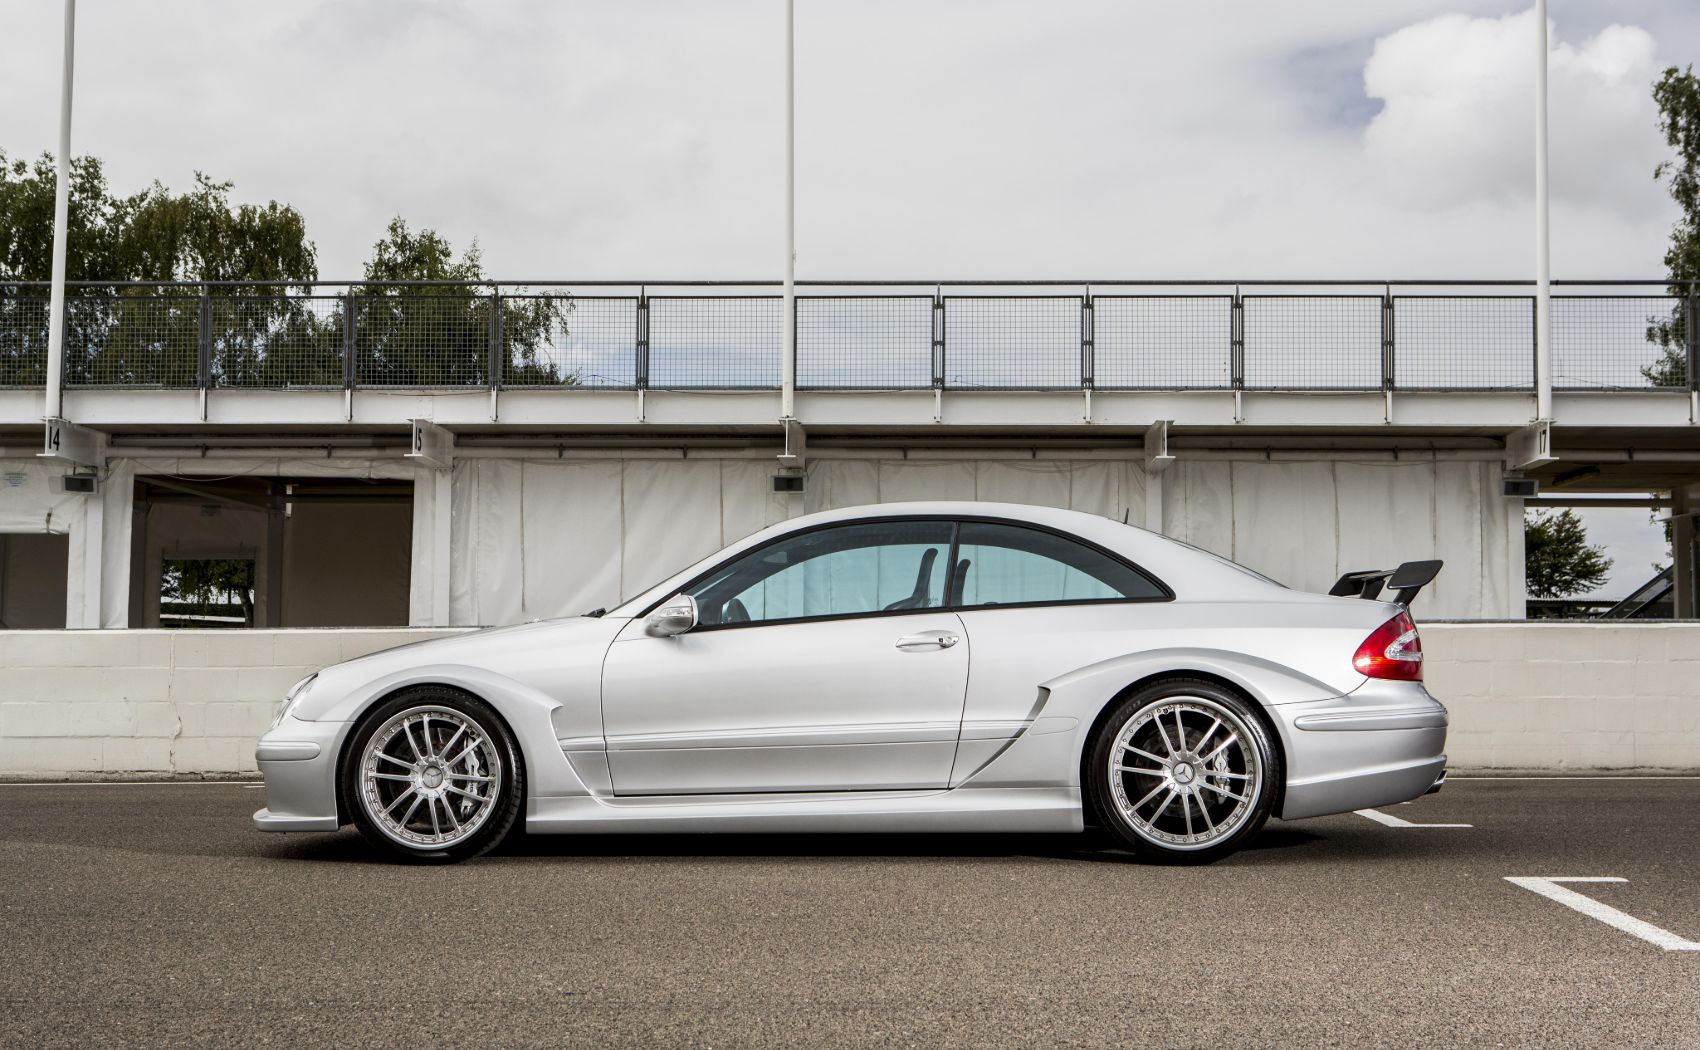 17 Years After Its Debut, the Mercedes CLK DTM AMG Is Still an Epic ...